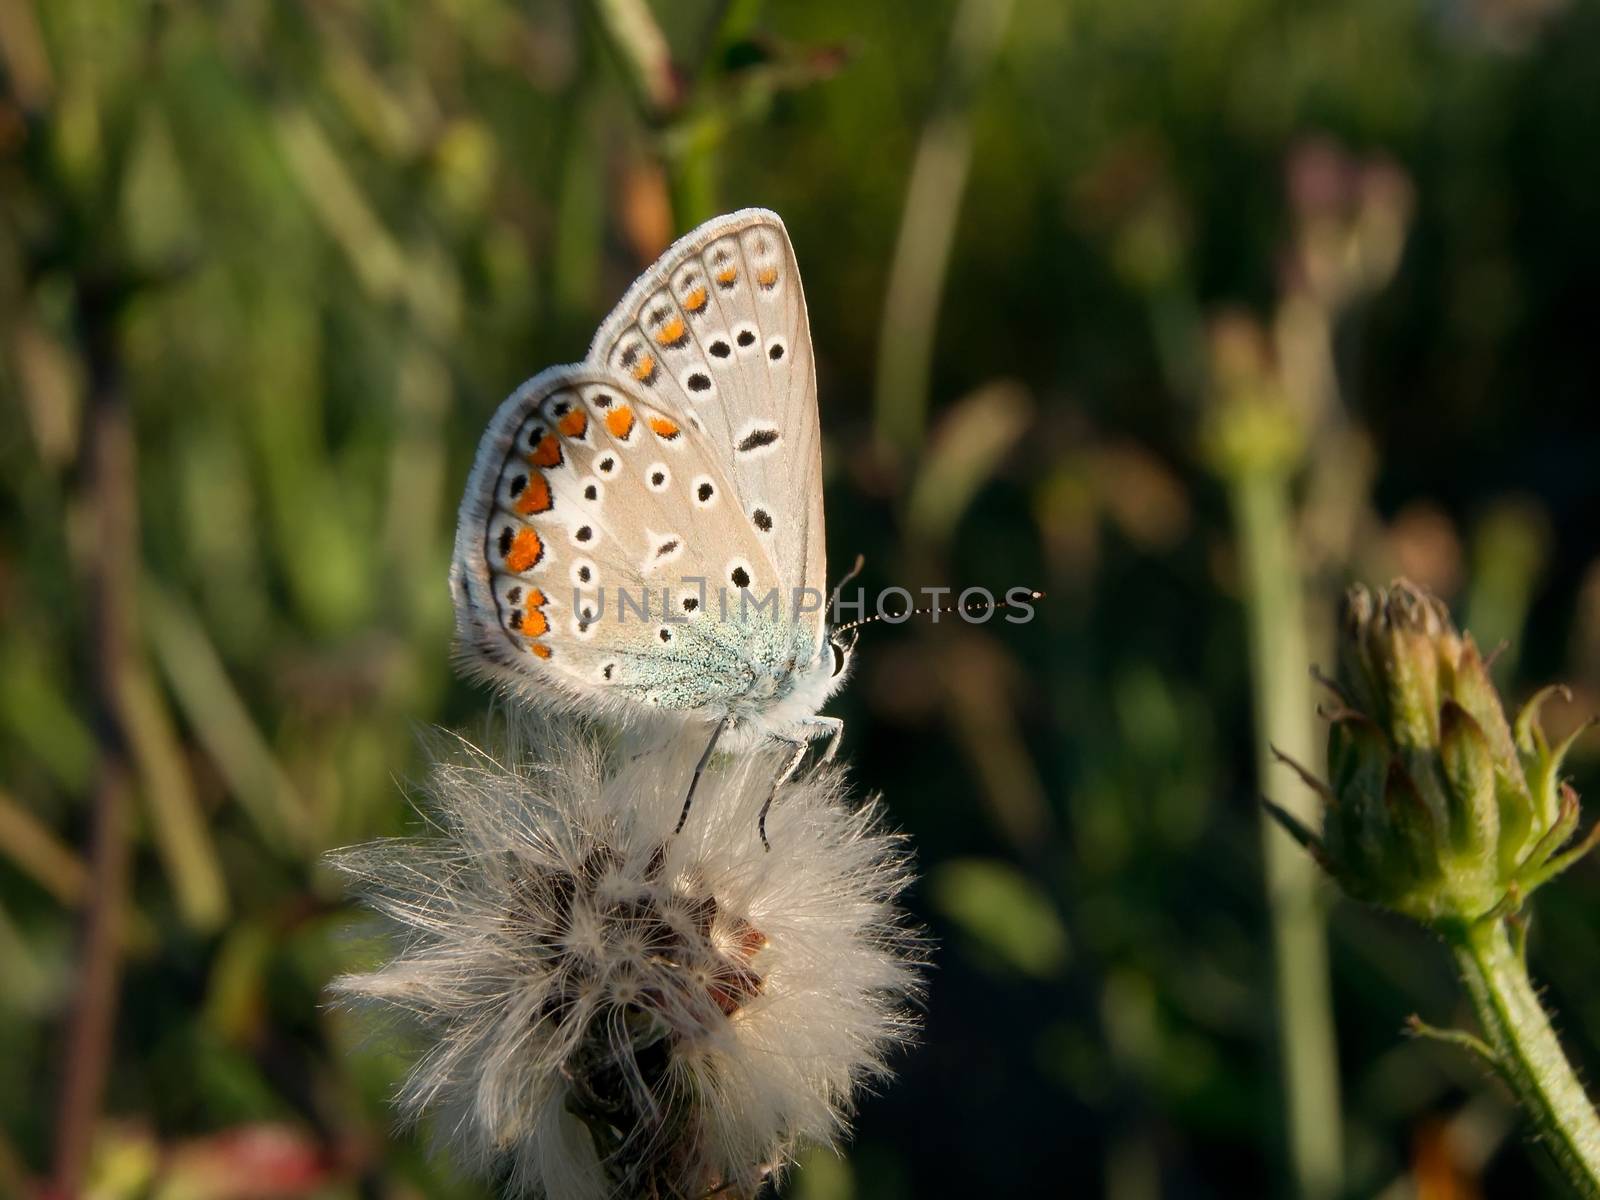 Common blue (Polyommatus icarus) in the autumn flowers.